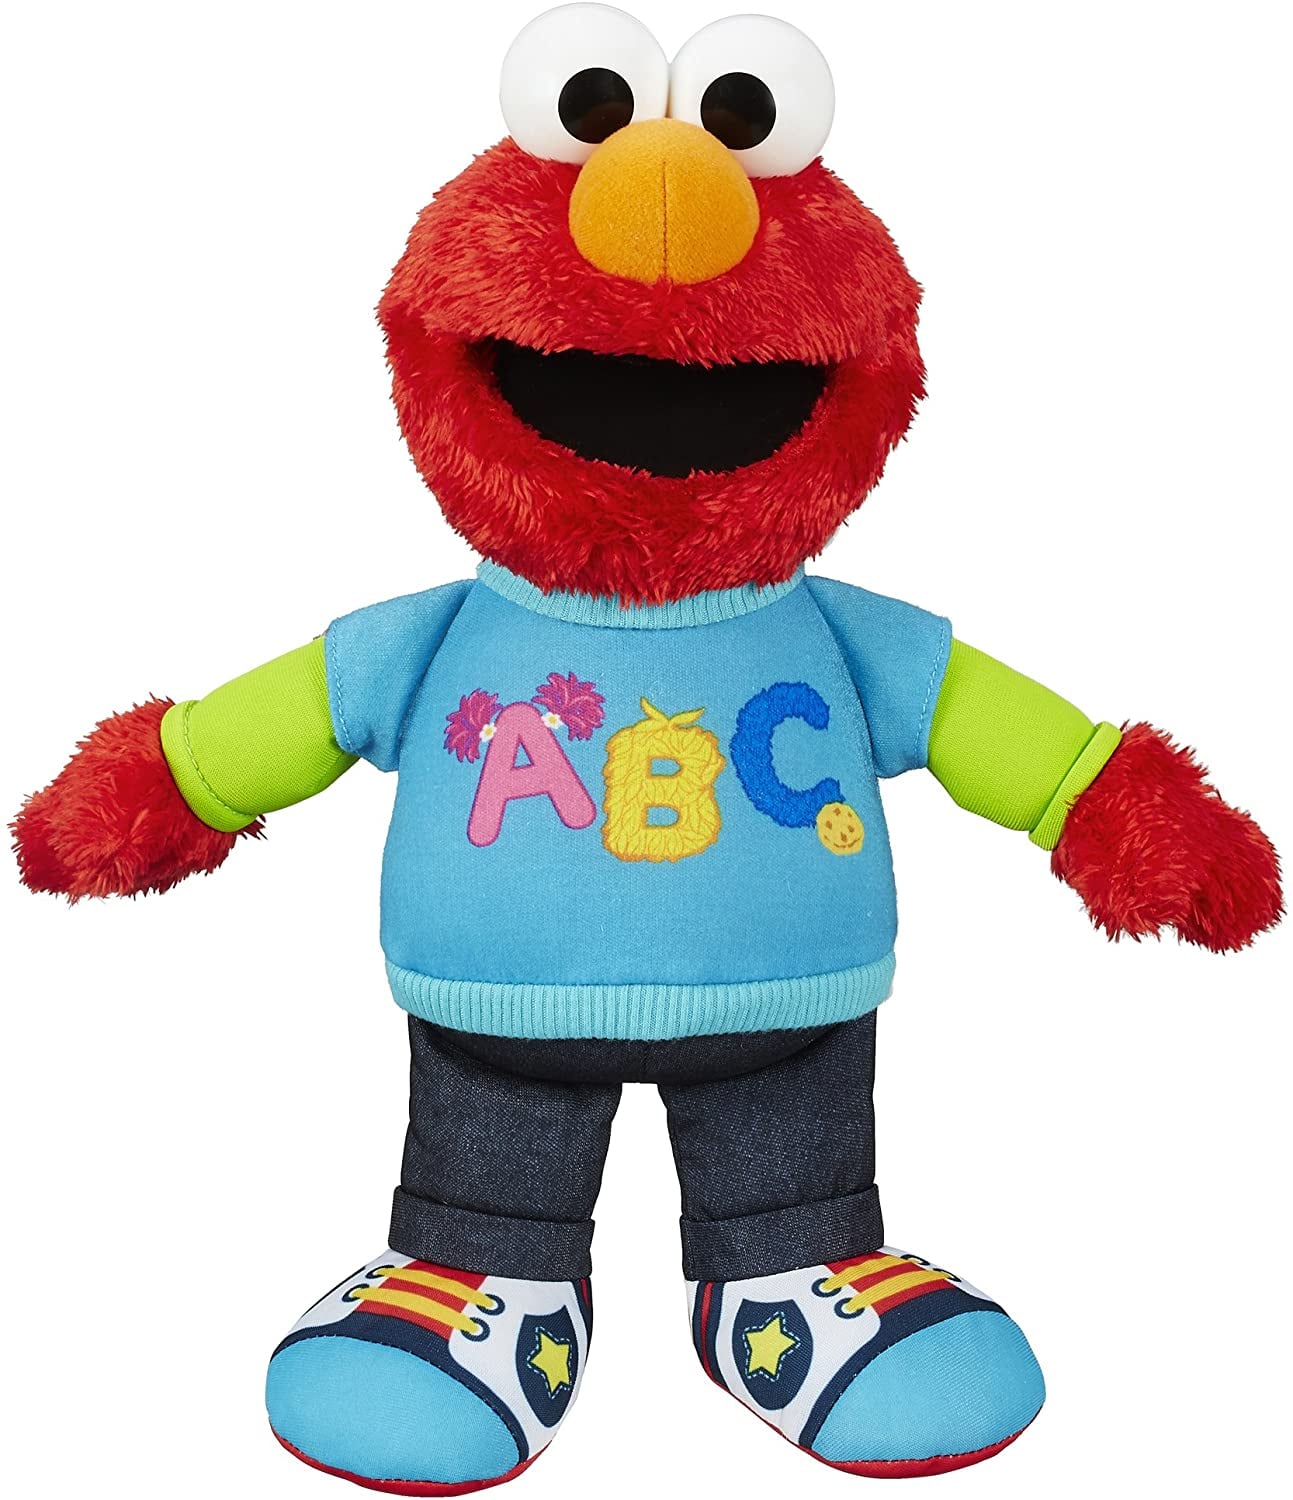 An Elmo Toy For Three Year Old: Sesame Street Love to Hug Elmo Talking, Singing, Hugging Plush Toy | The 28 Best Gift For 3-Year-Olds in 2022 | POPSUGAR Family Photo 20